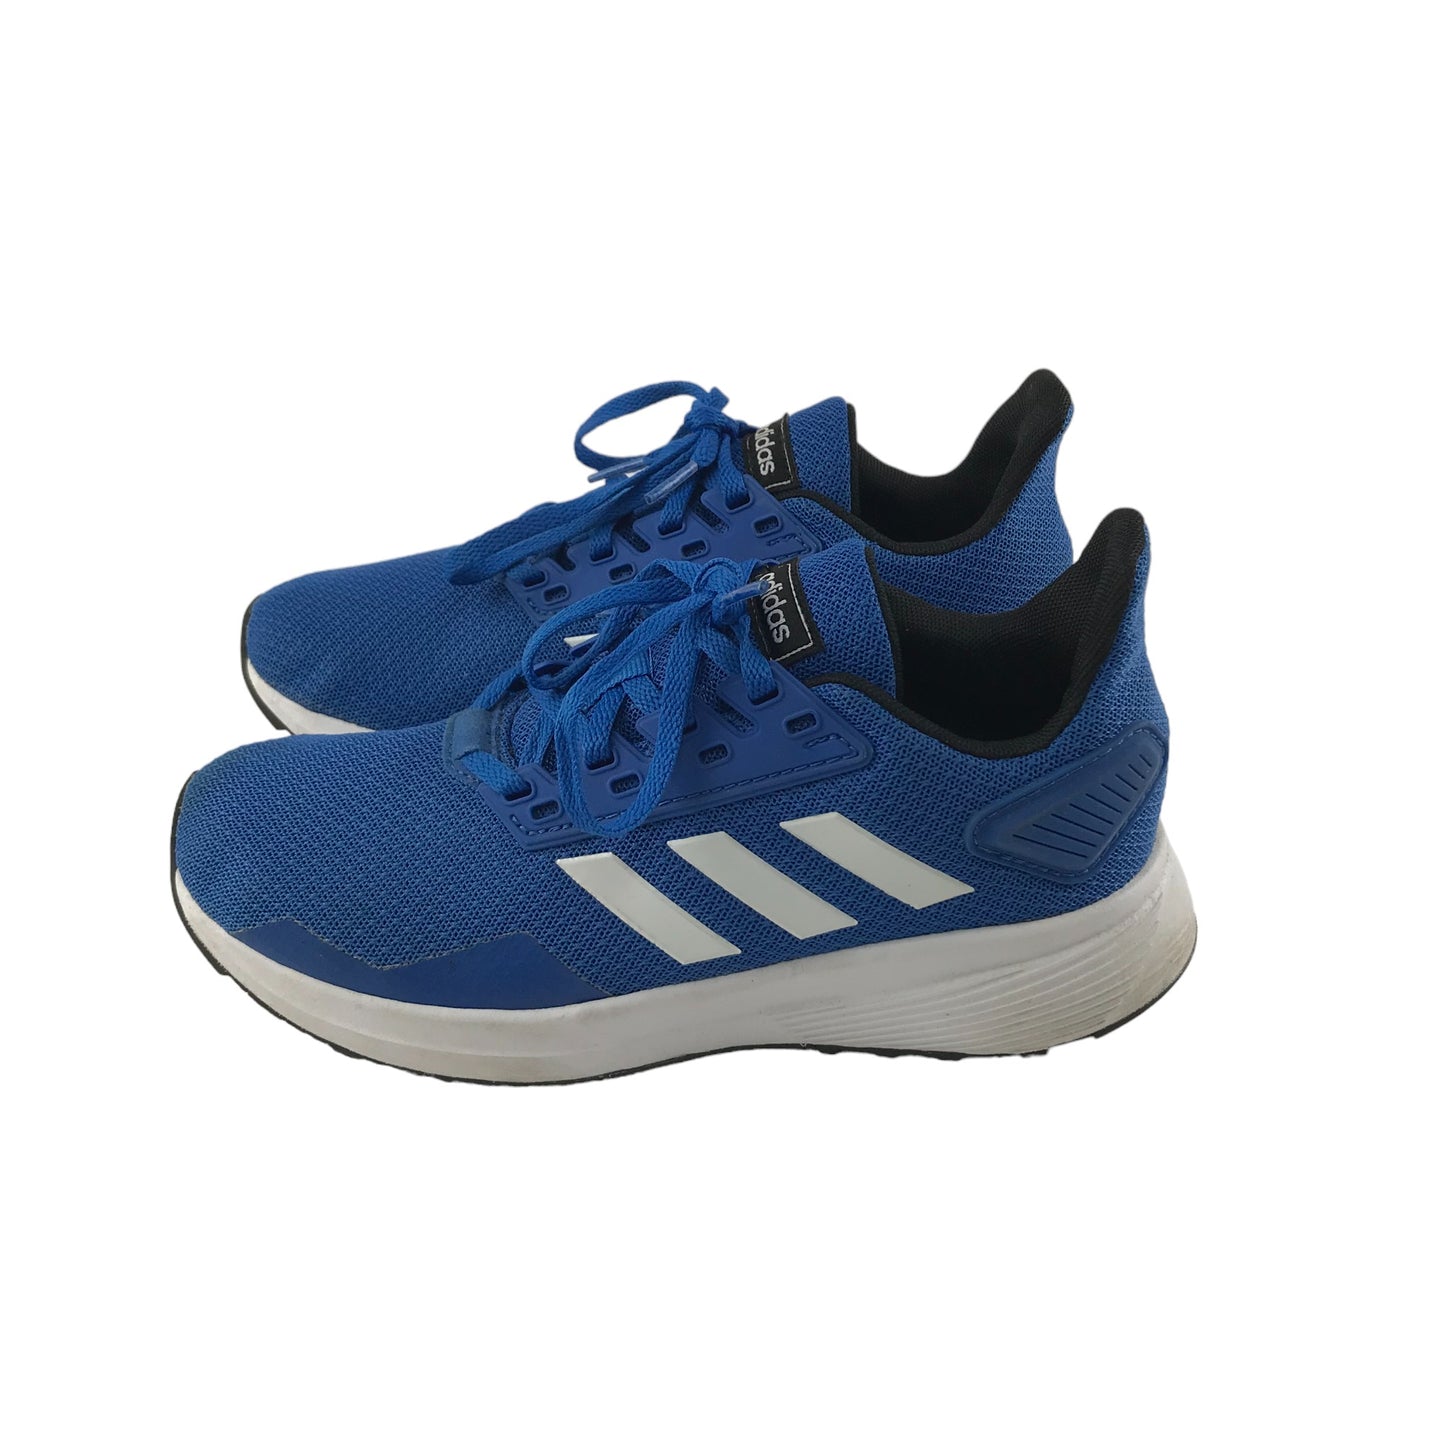 Adidas Trainers Shoe Size 3 Blue Cloudfoam with Laces